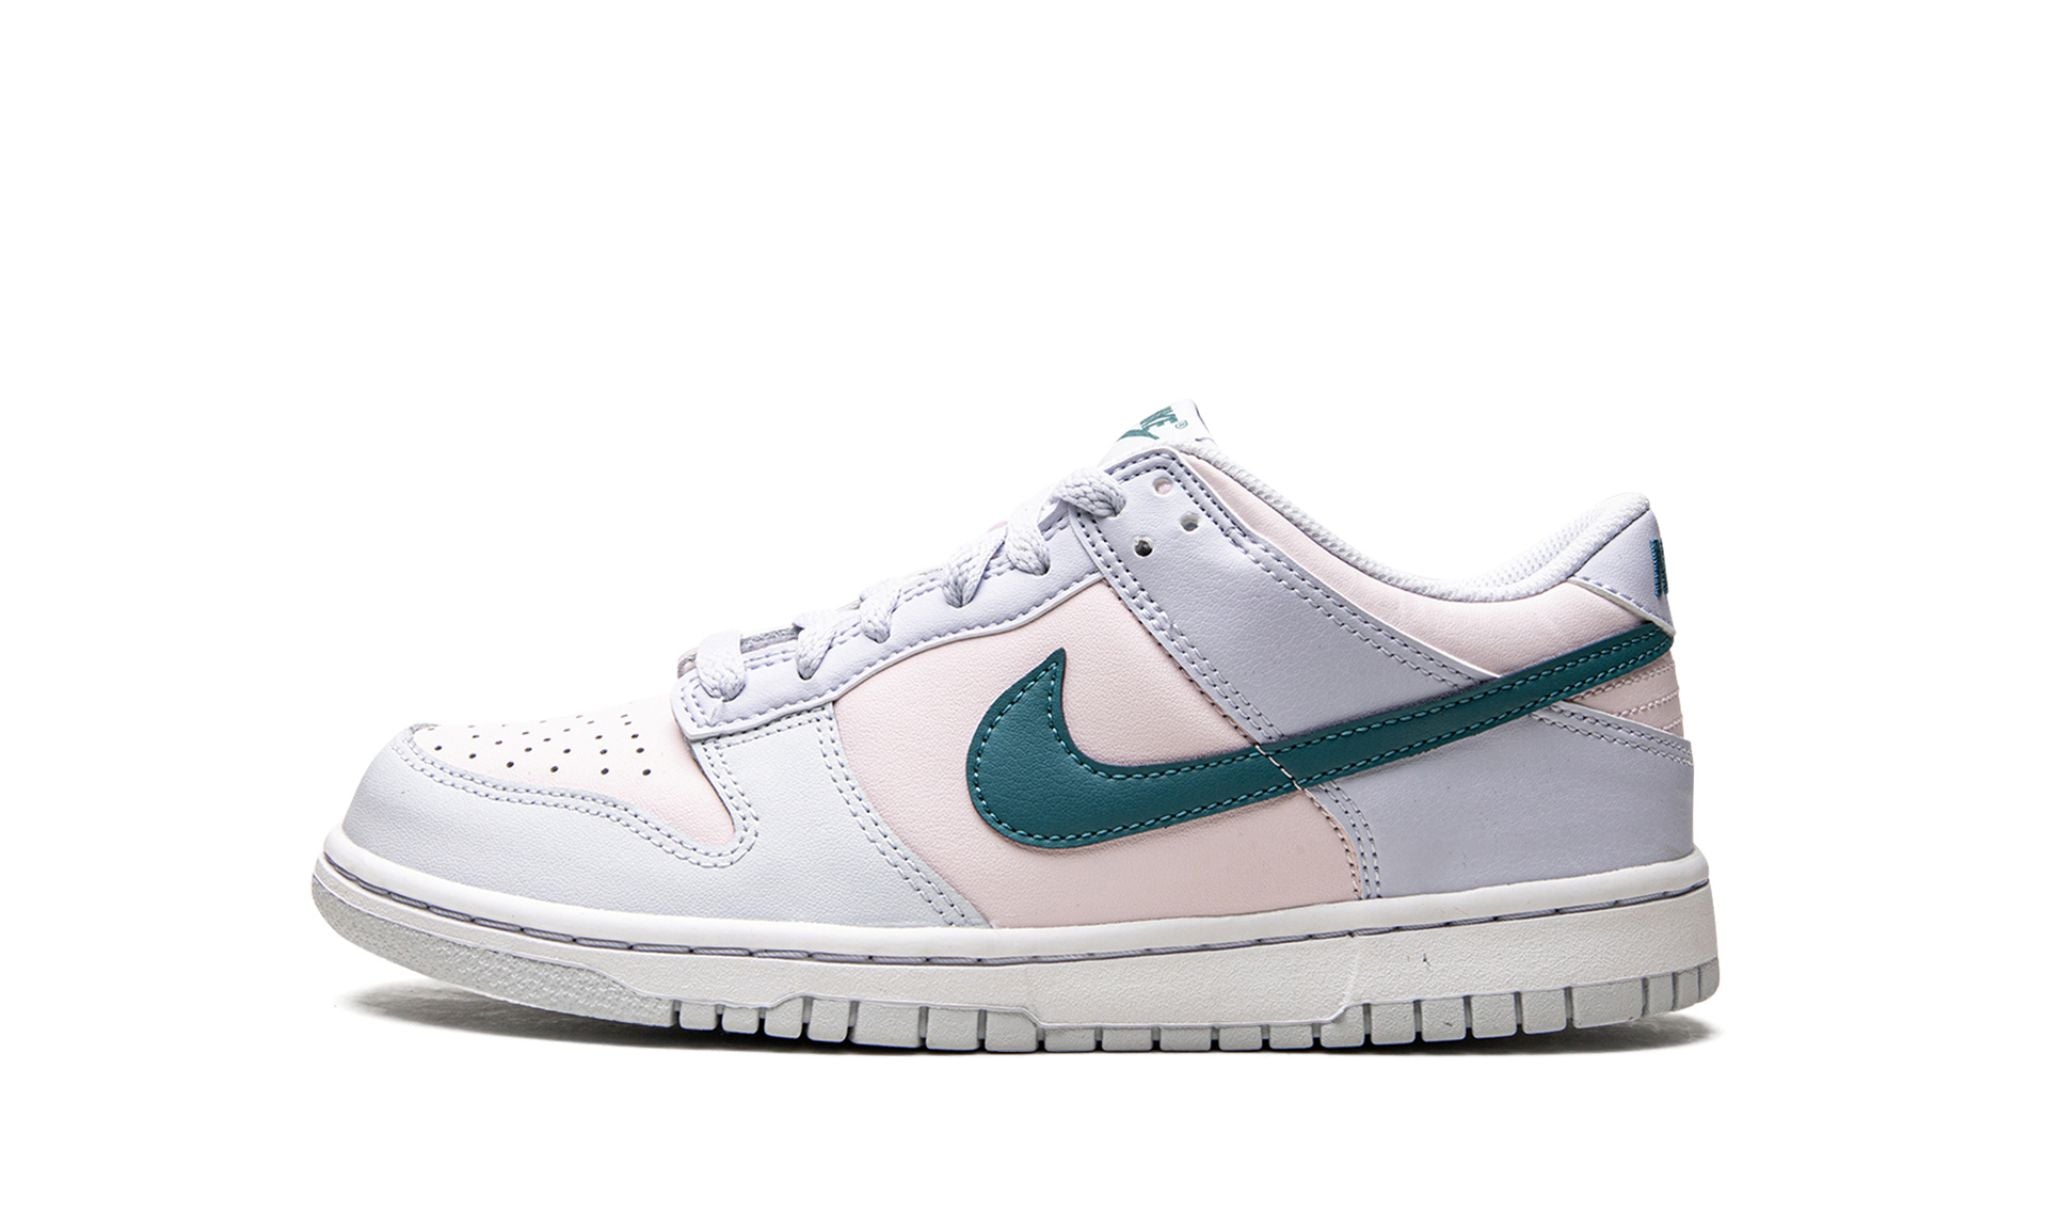 Nike Dunk Low “Mineral Teal” (GS)